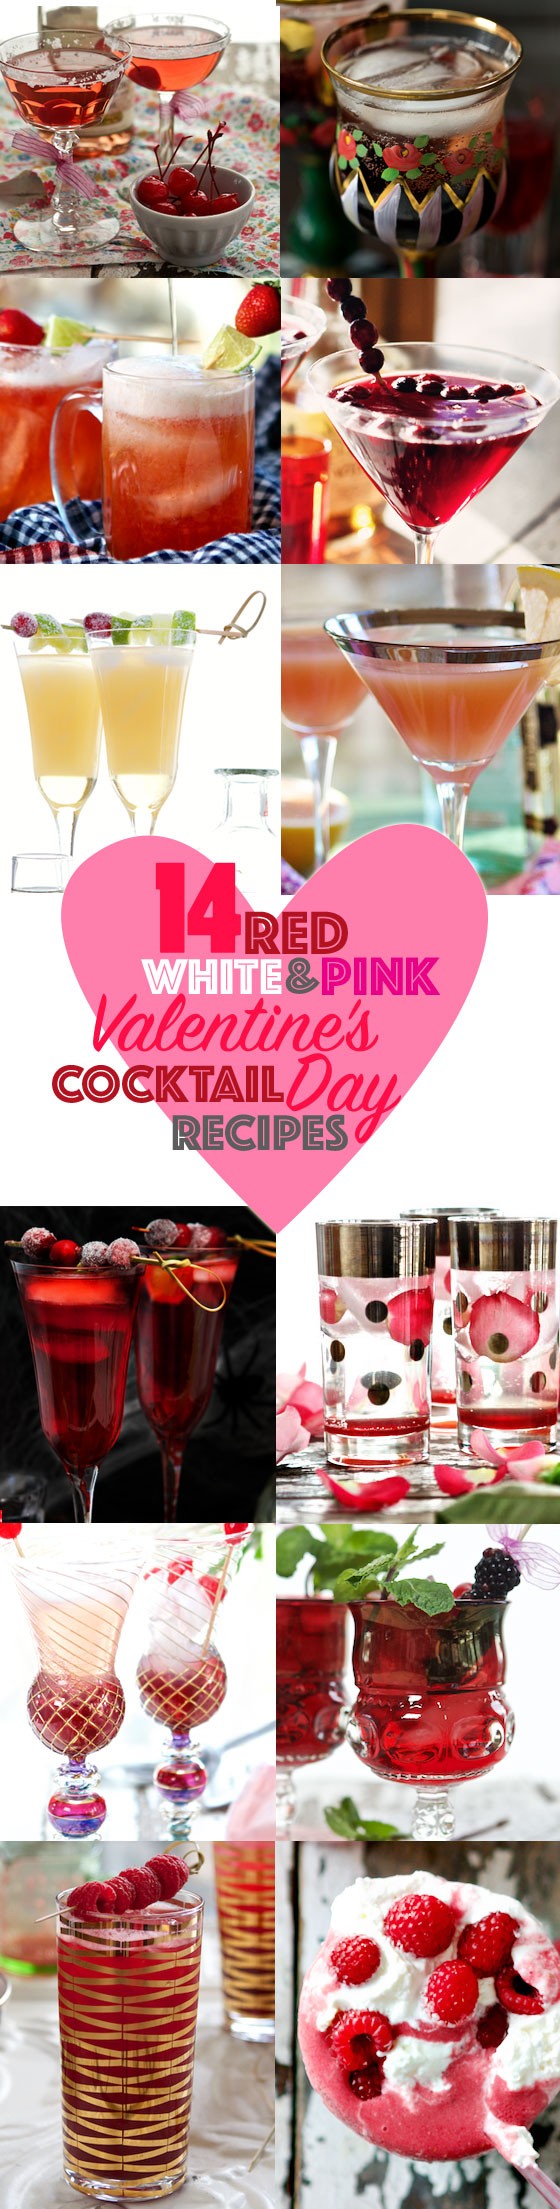 14 Red, White & Pink Valentine's Day Cocktail Recipes! MarlaMeridith.com #cocktails @MarlaMeridith